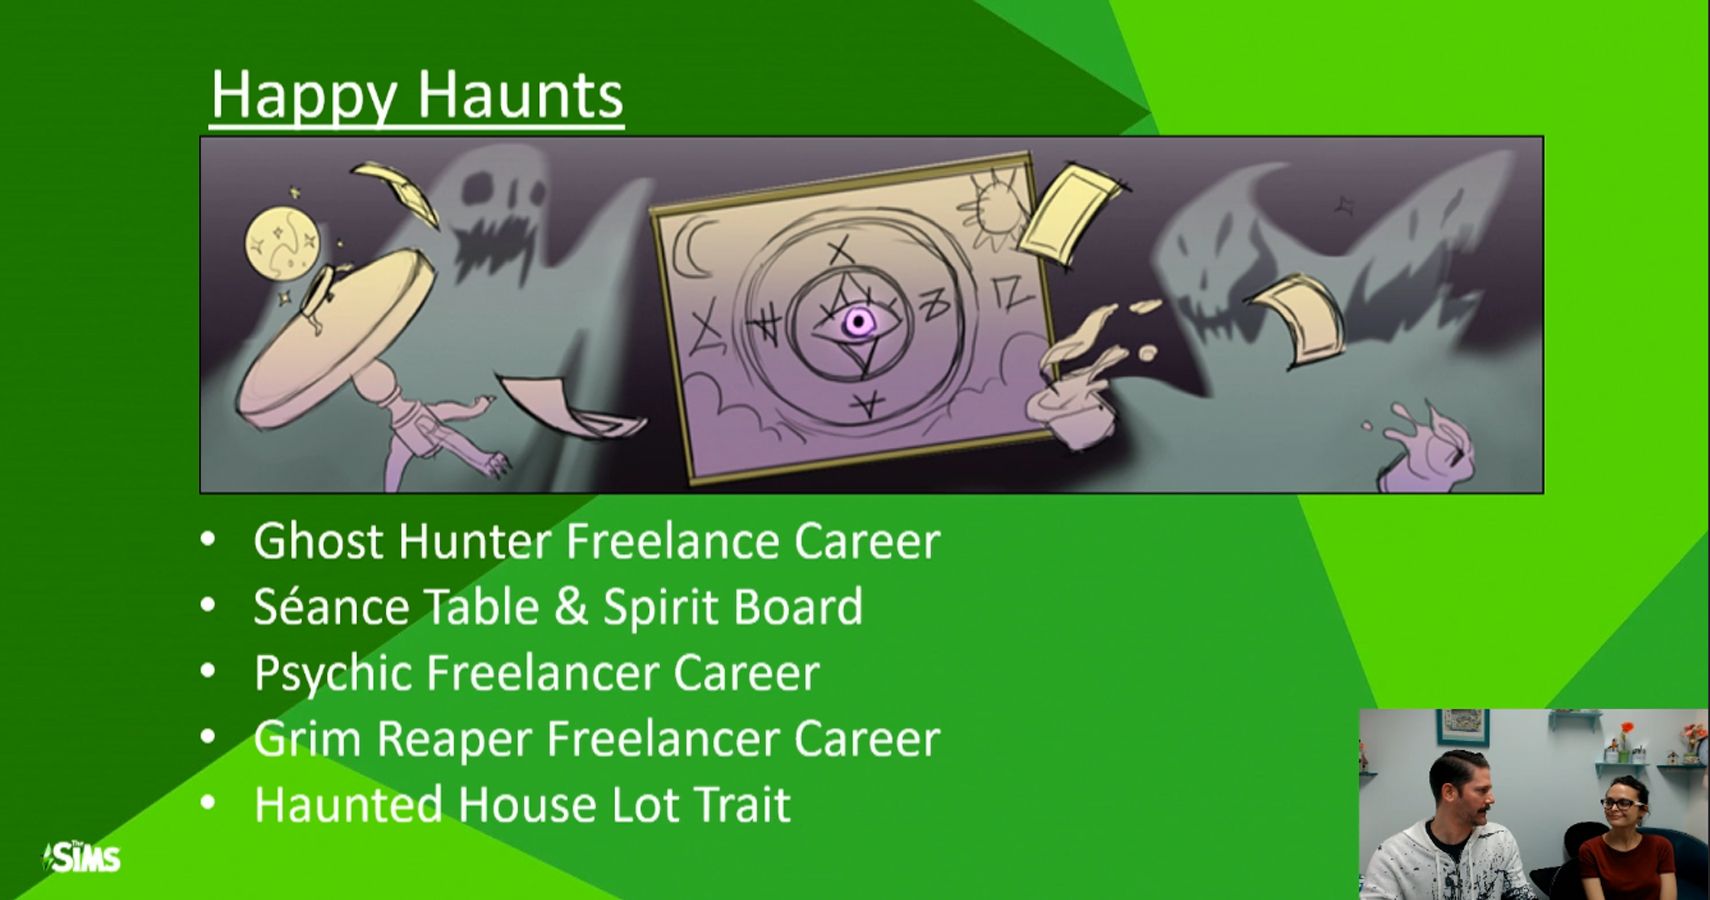 Hapy Haunts theme information from the stuff pack vote.